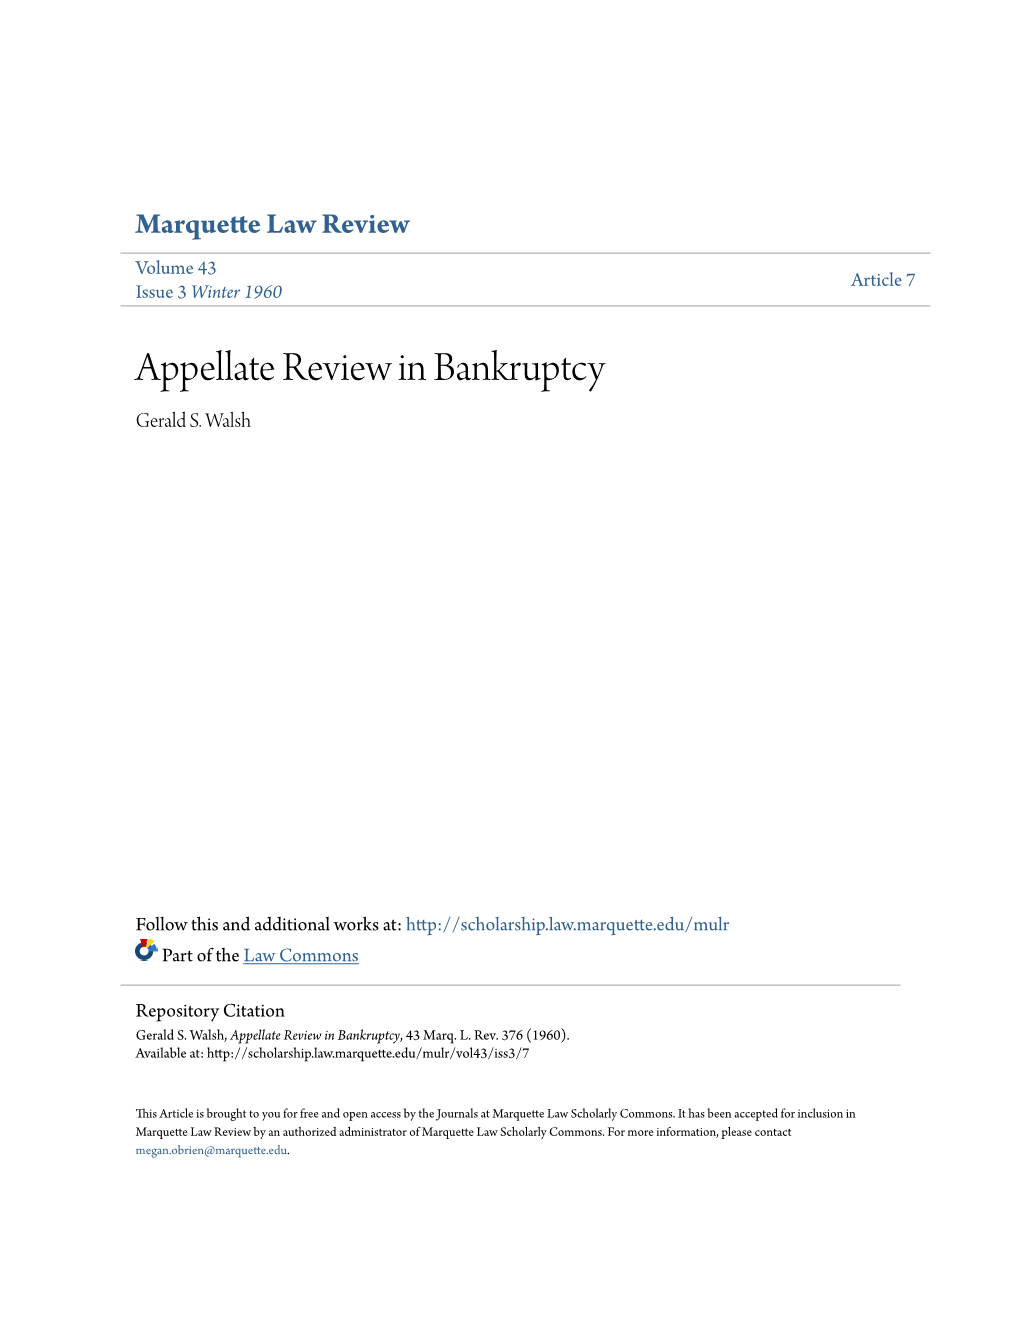 Appellate Review in Bankruptcy Gerald S